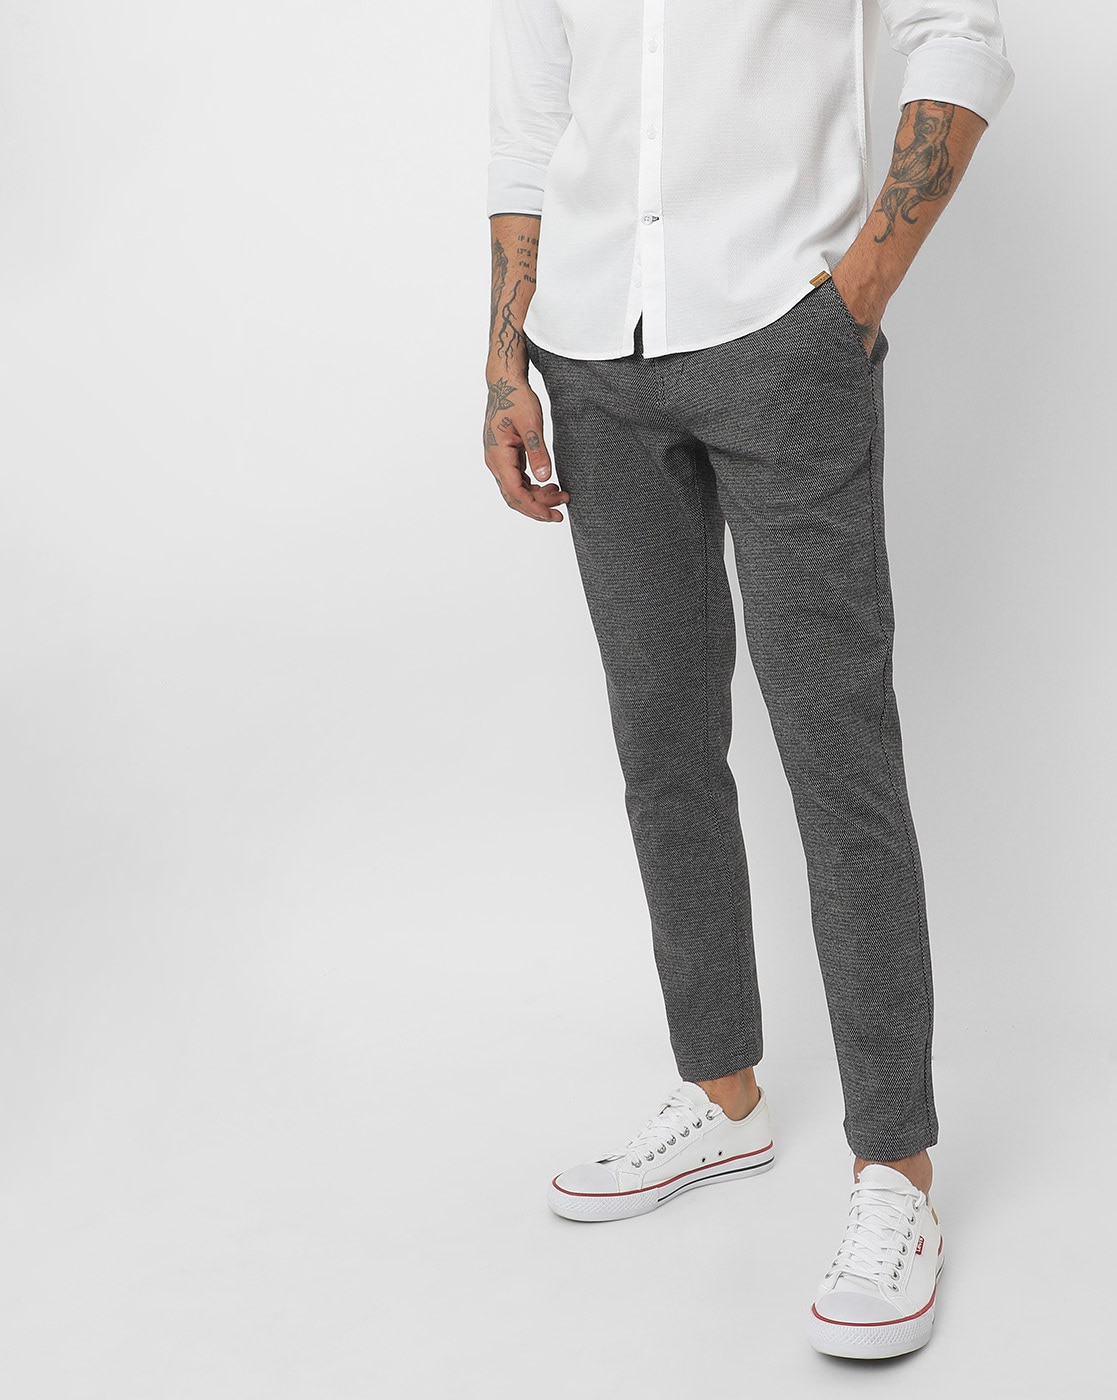 Mens Formal 4 way Stretch Trousers in Light Grey Slim Fit